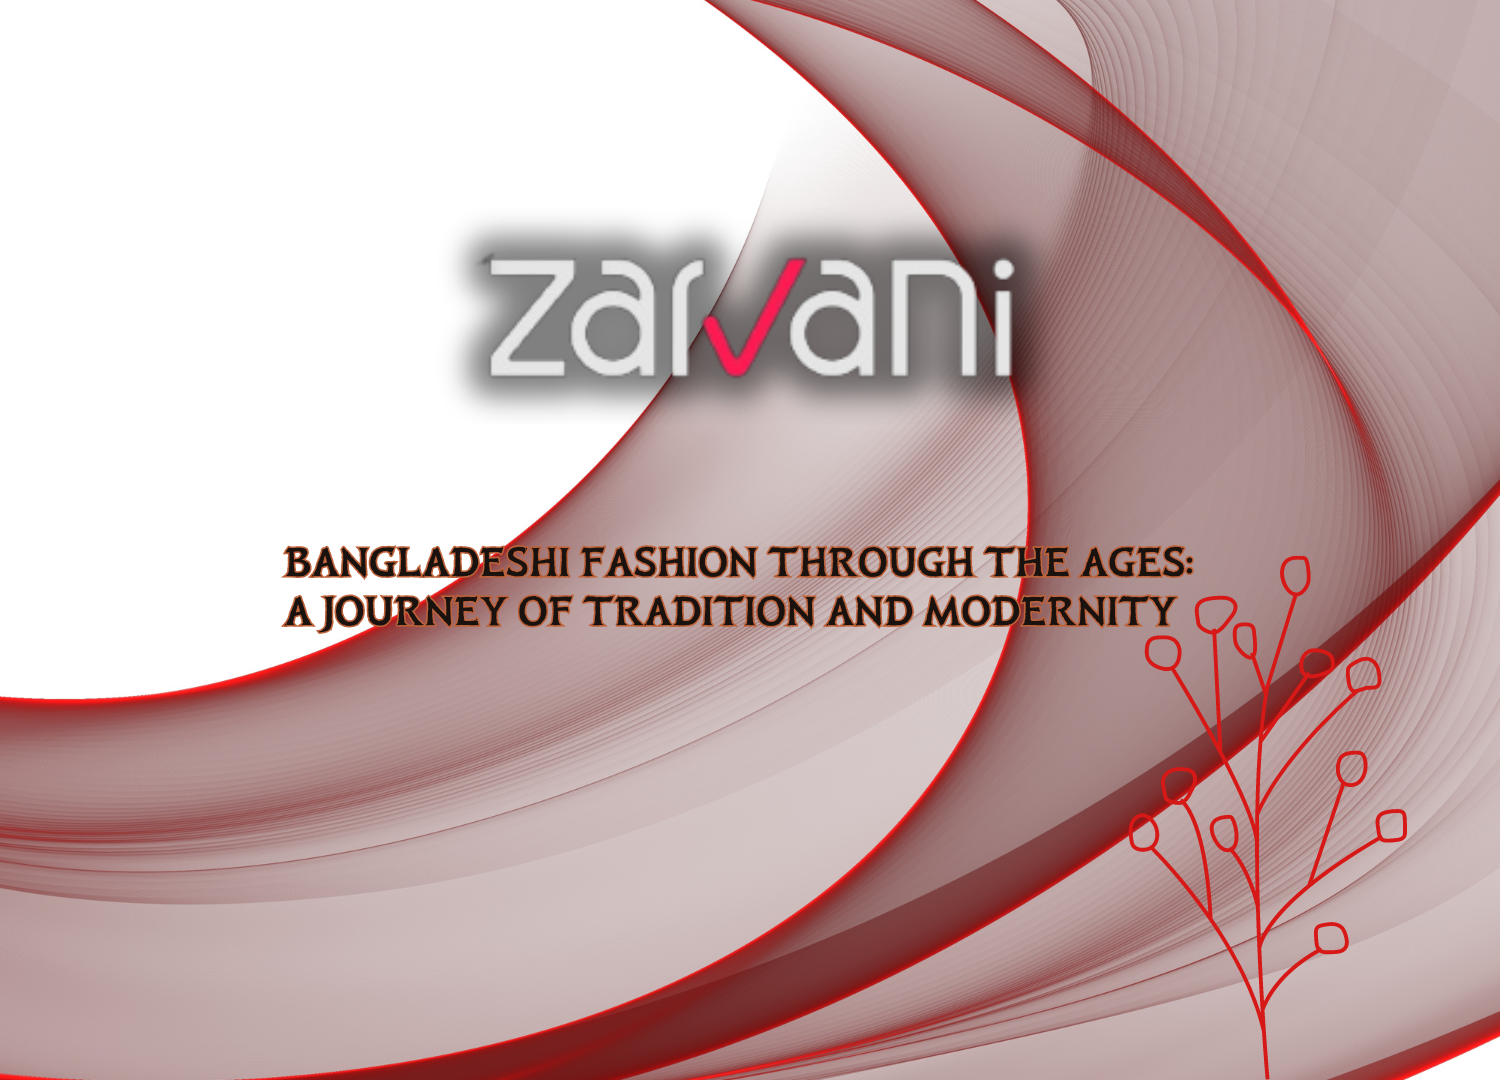 Bangladeshi Fashion Through the Ages: A Journey of Tradition and Modernity